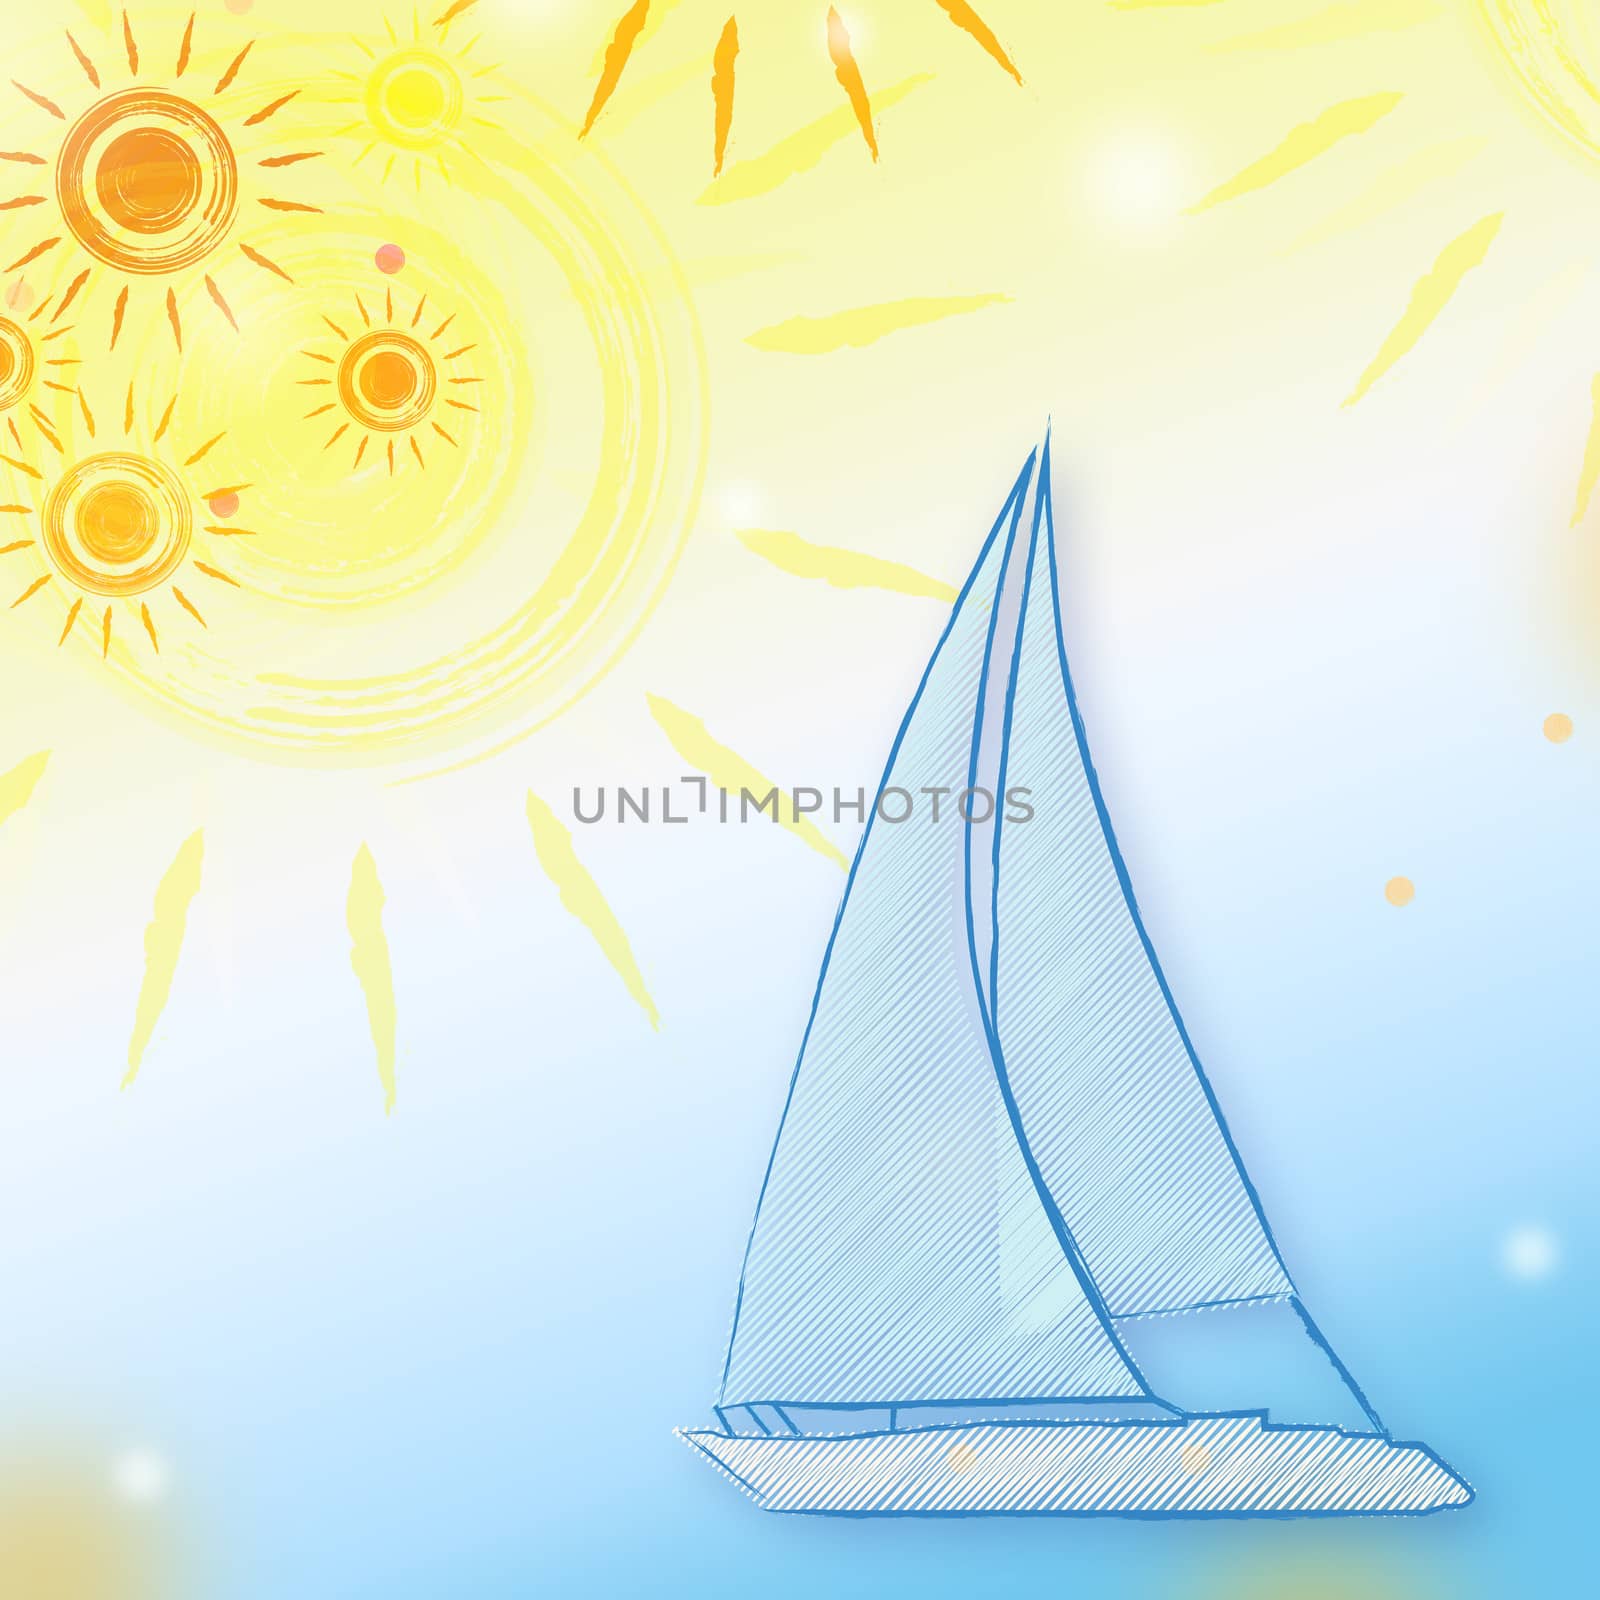 summer background with yellow suns and blue boat by marinini